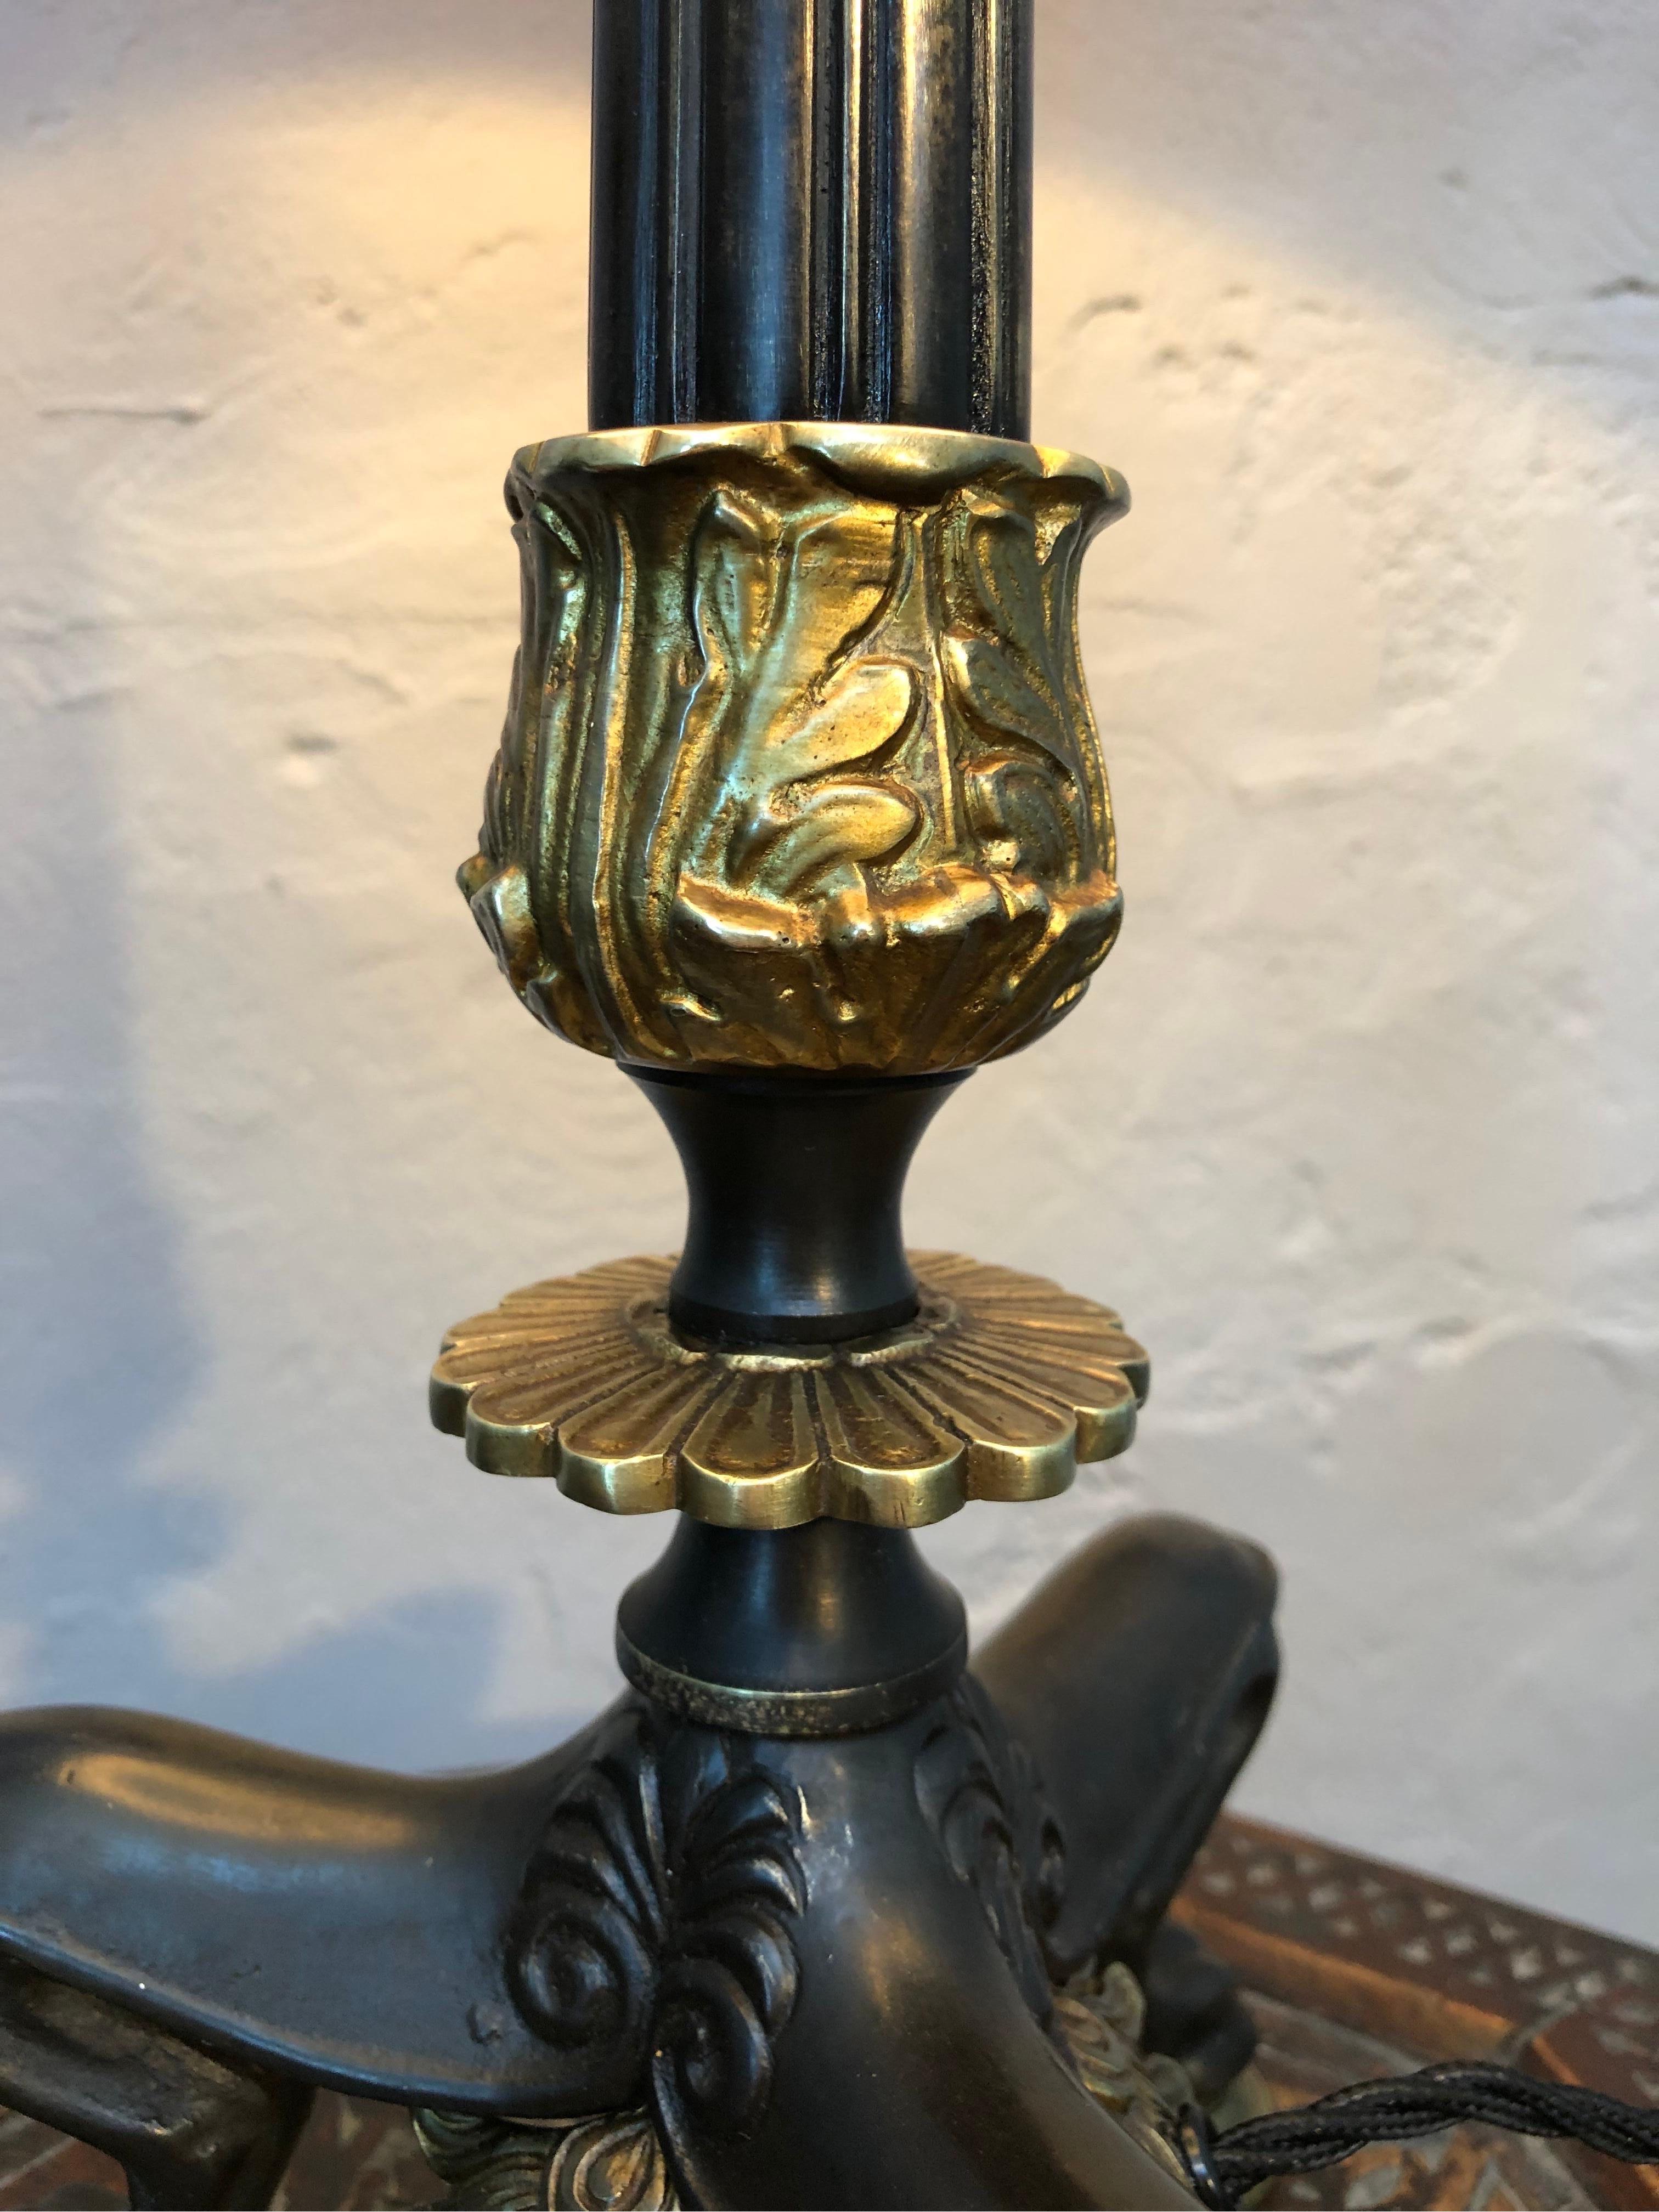 Regency Antique Bronze Napoleon III Candelabra Table Lamp from the 1800s For Sale